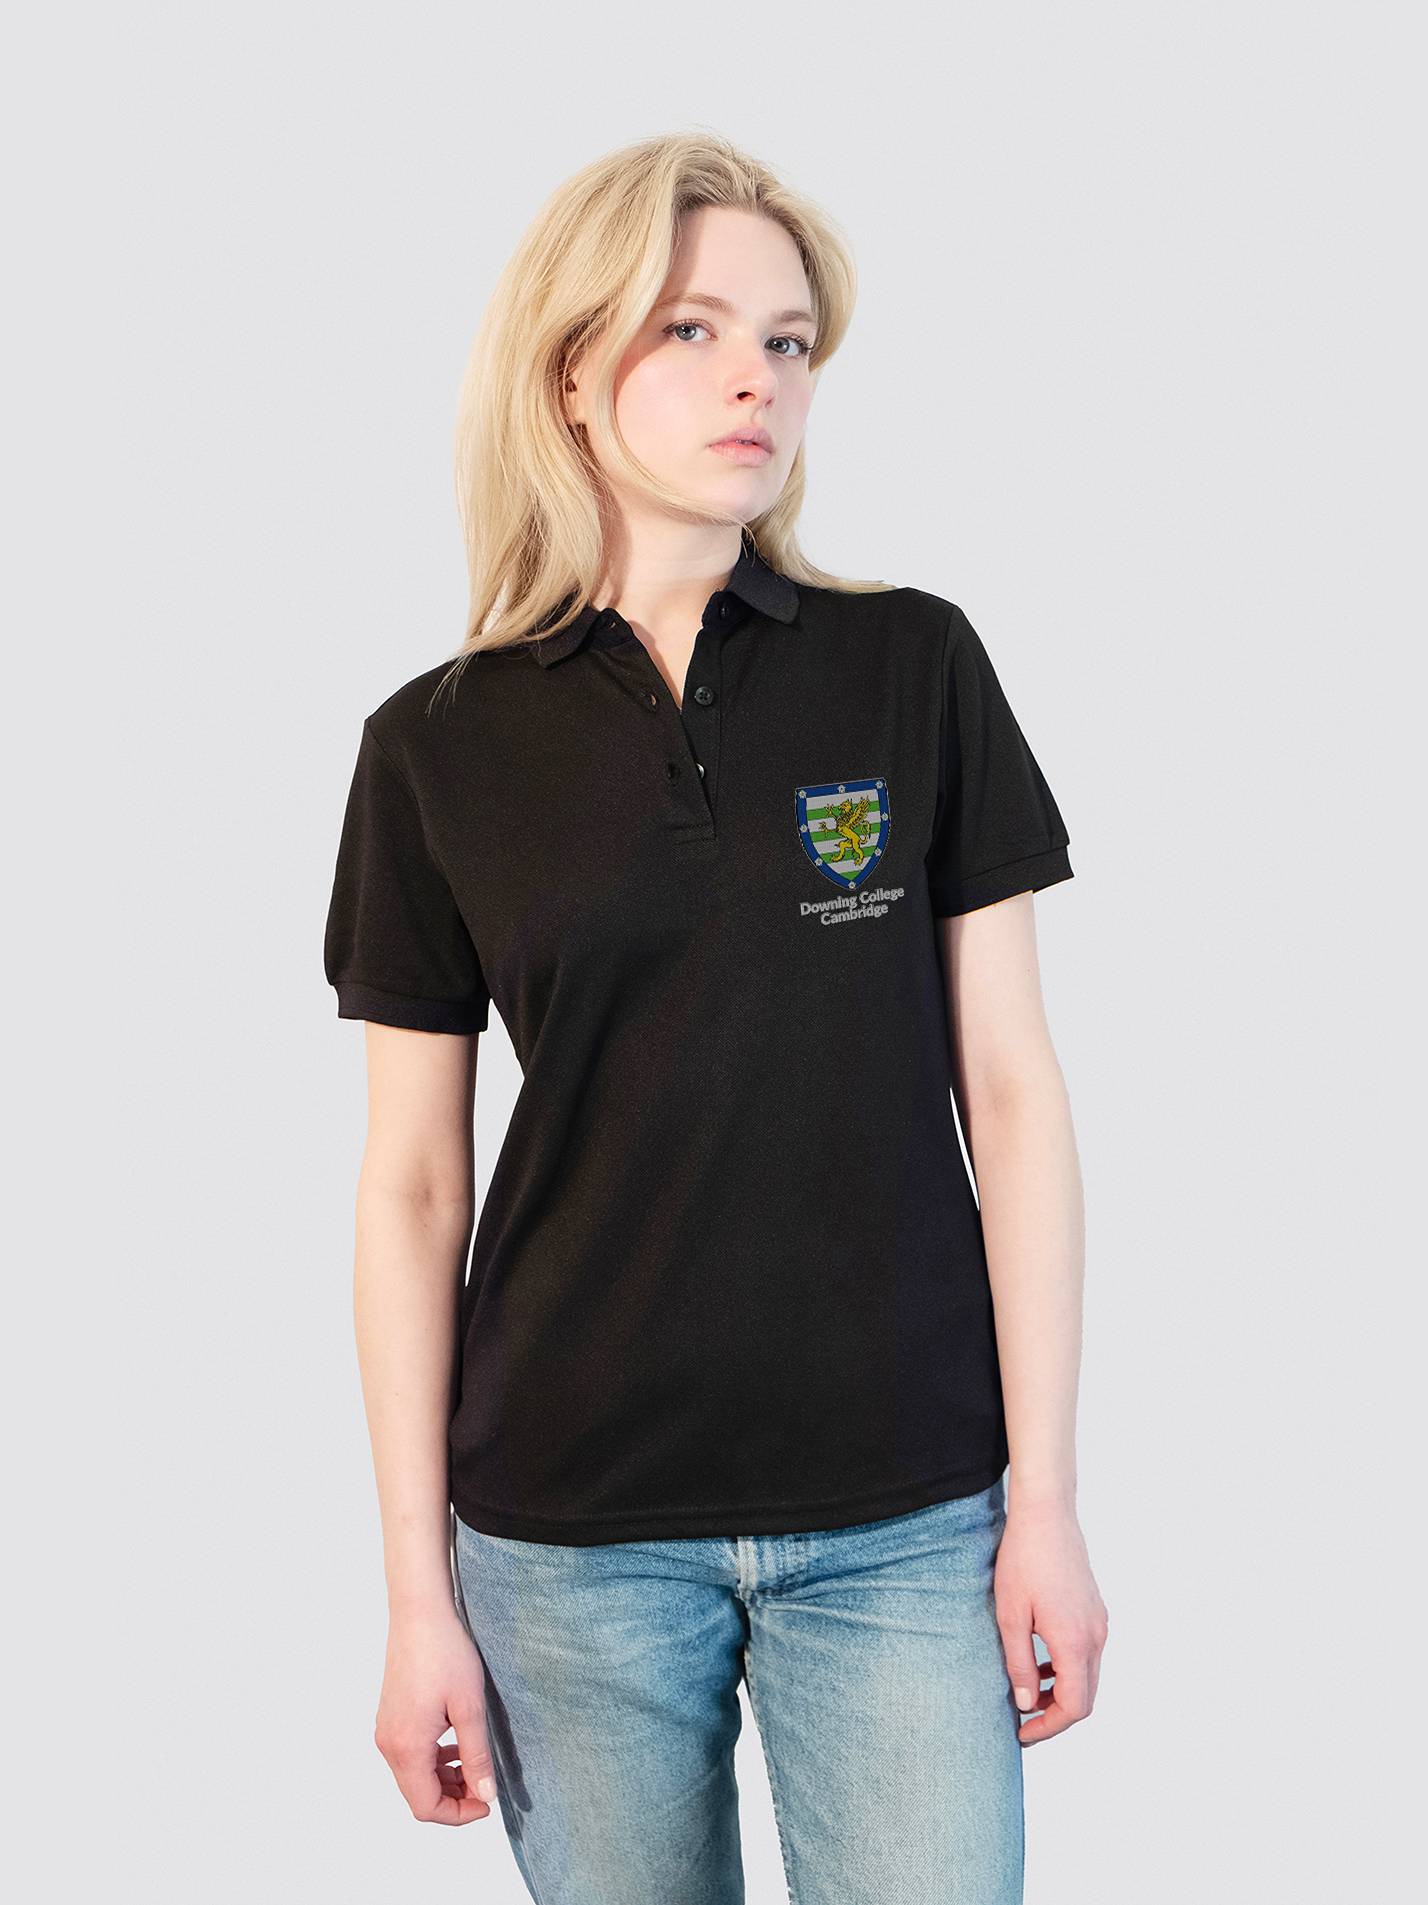 Downing College Cambridge JCR Sustainable Ladies Polo Shirt